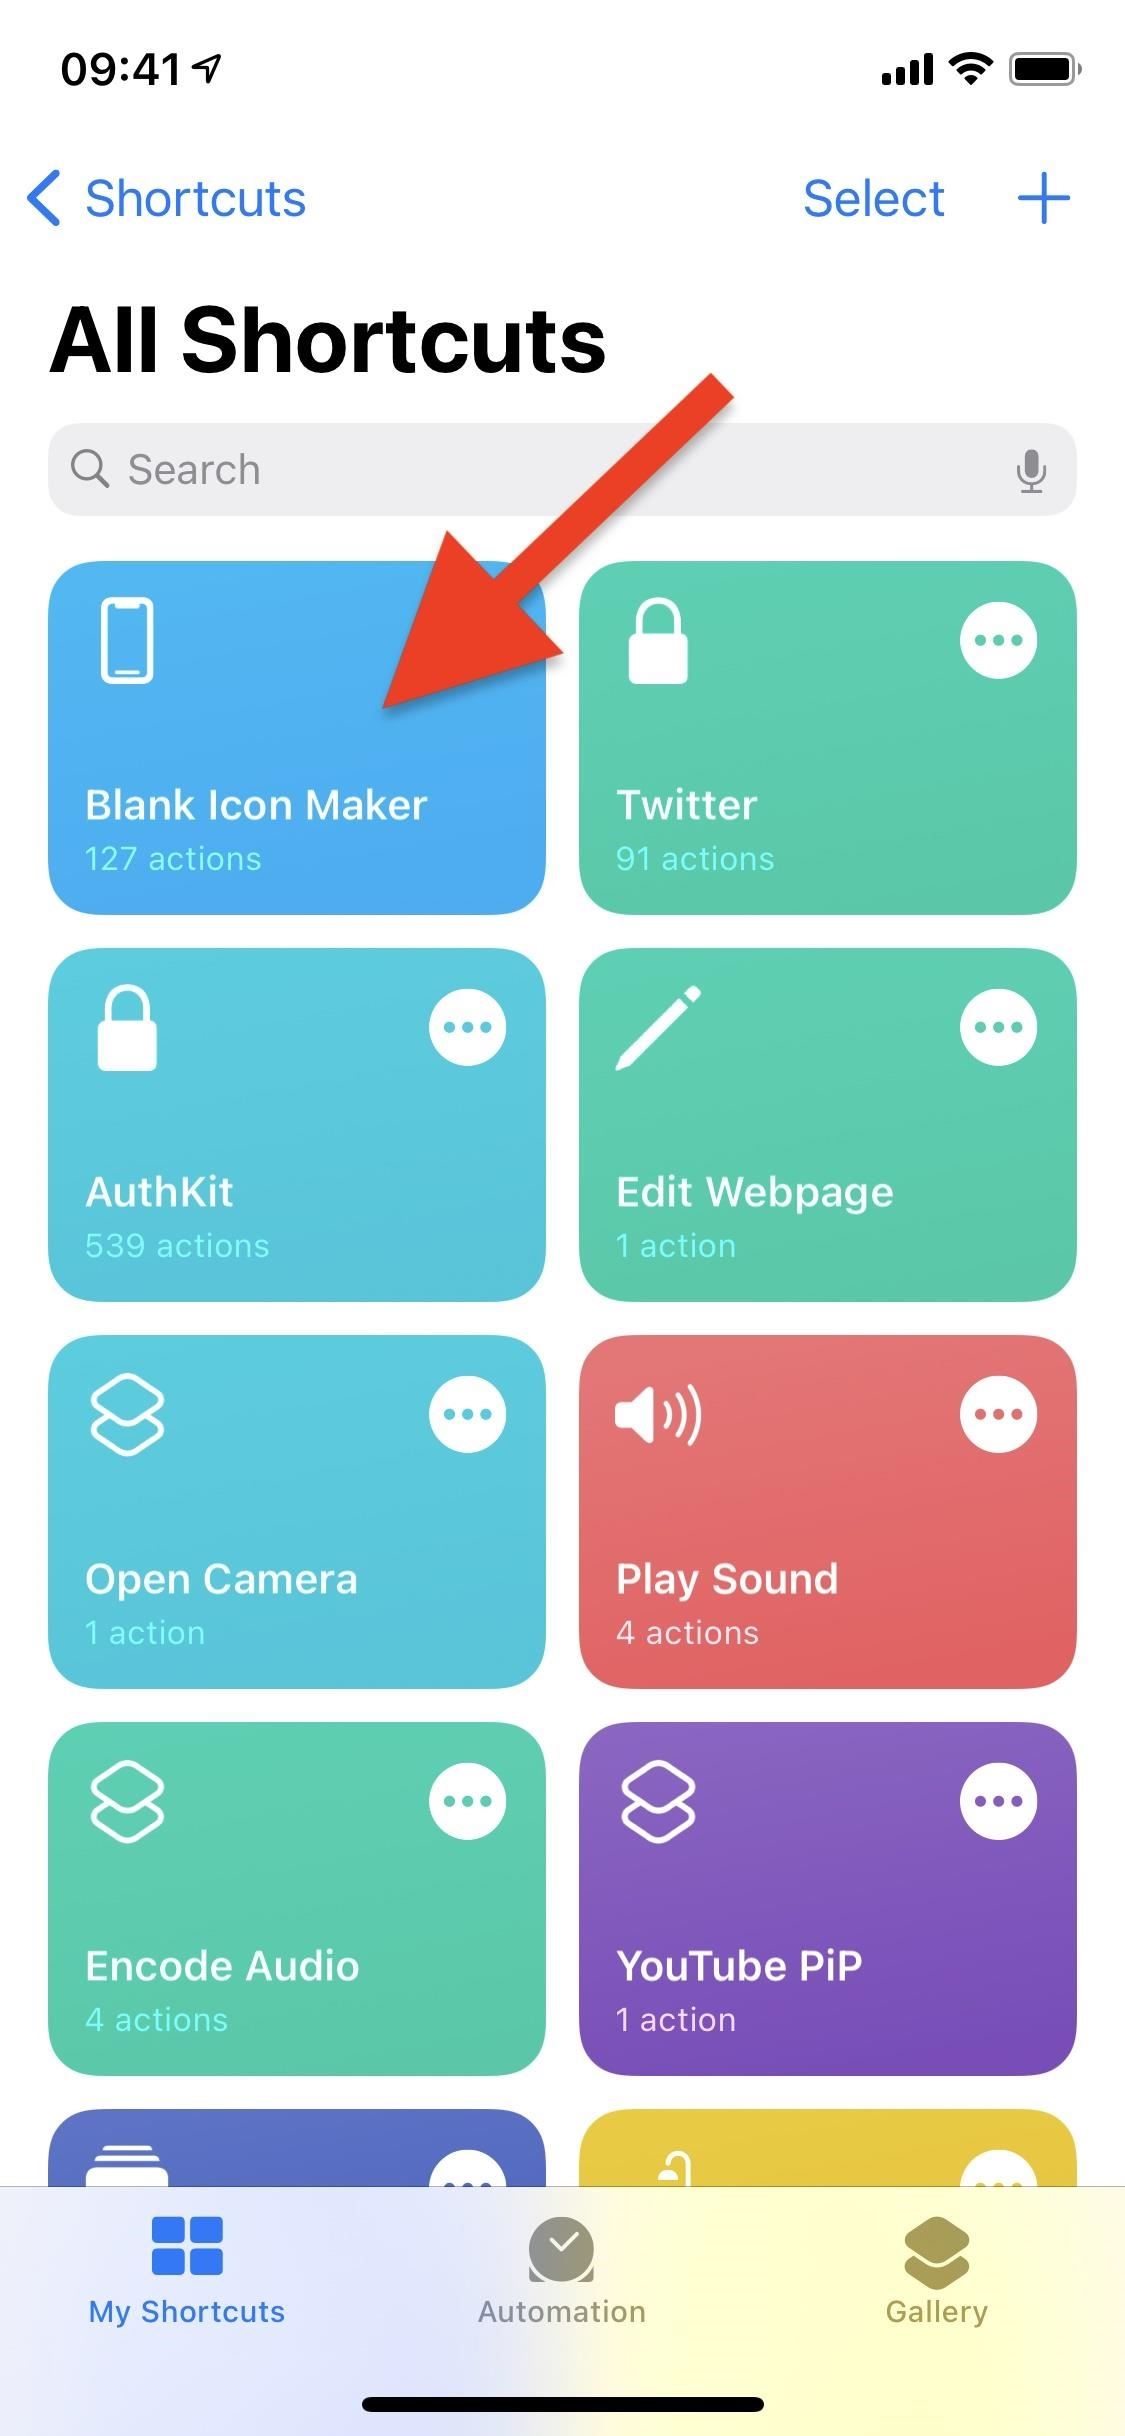 Blank Icon Maker: The Easiest Way to Place Apps, Folders & Widgets Anywhere on Your iPhone's Home Screen